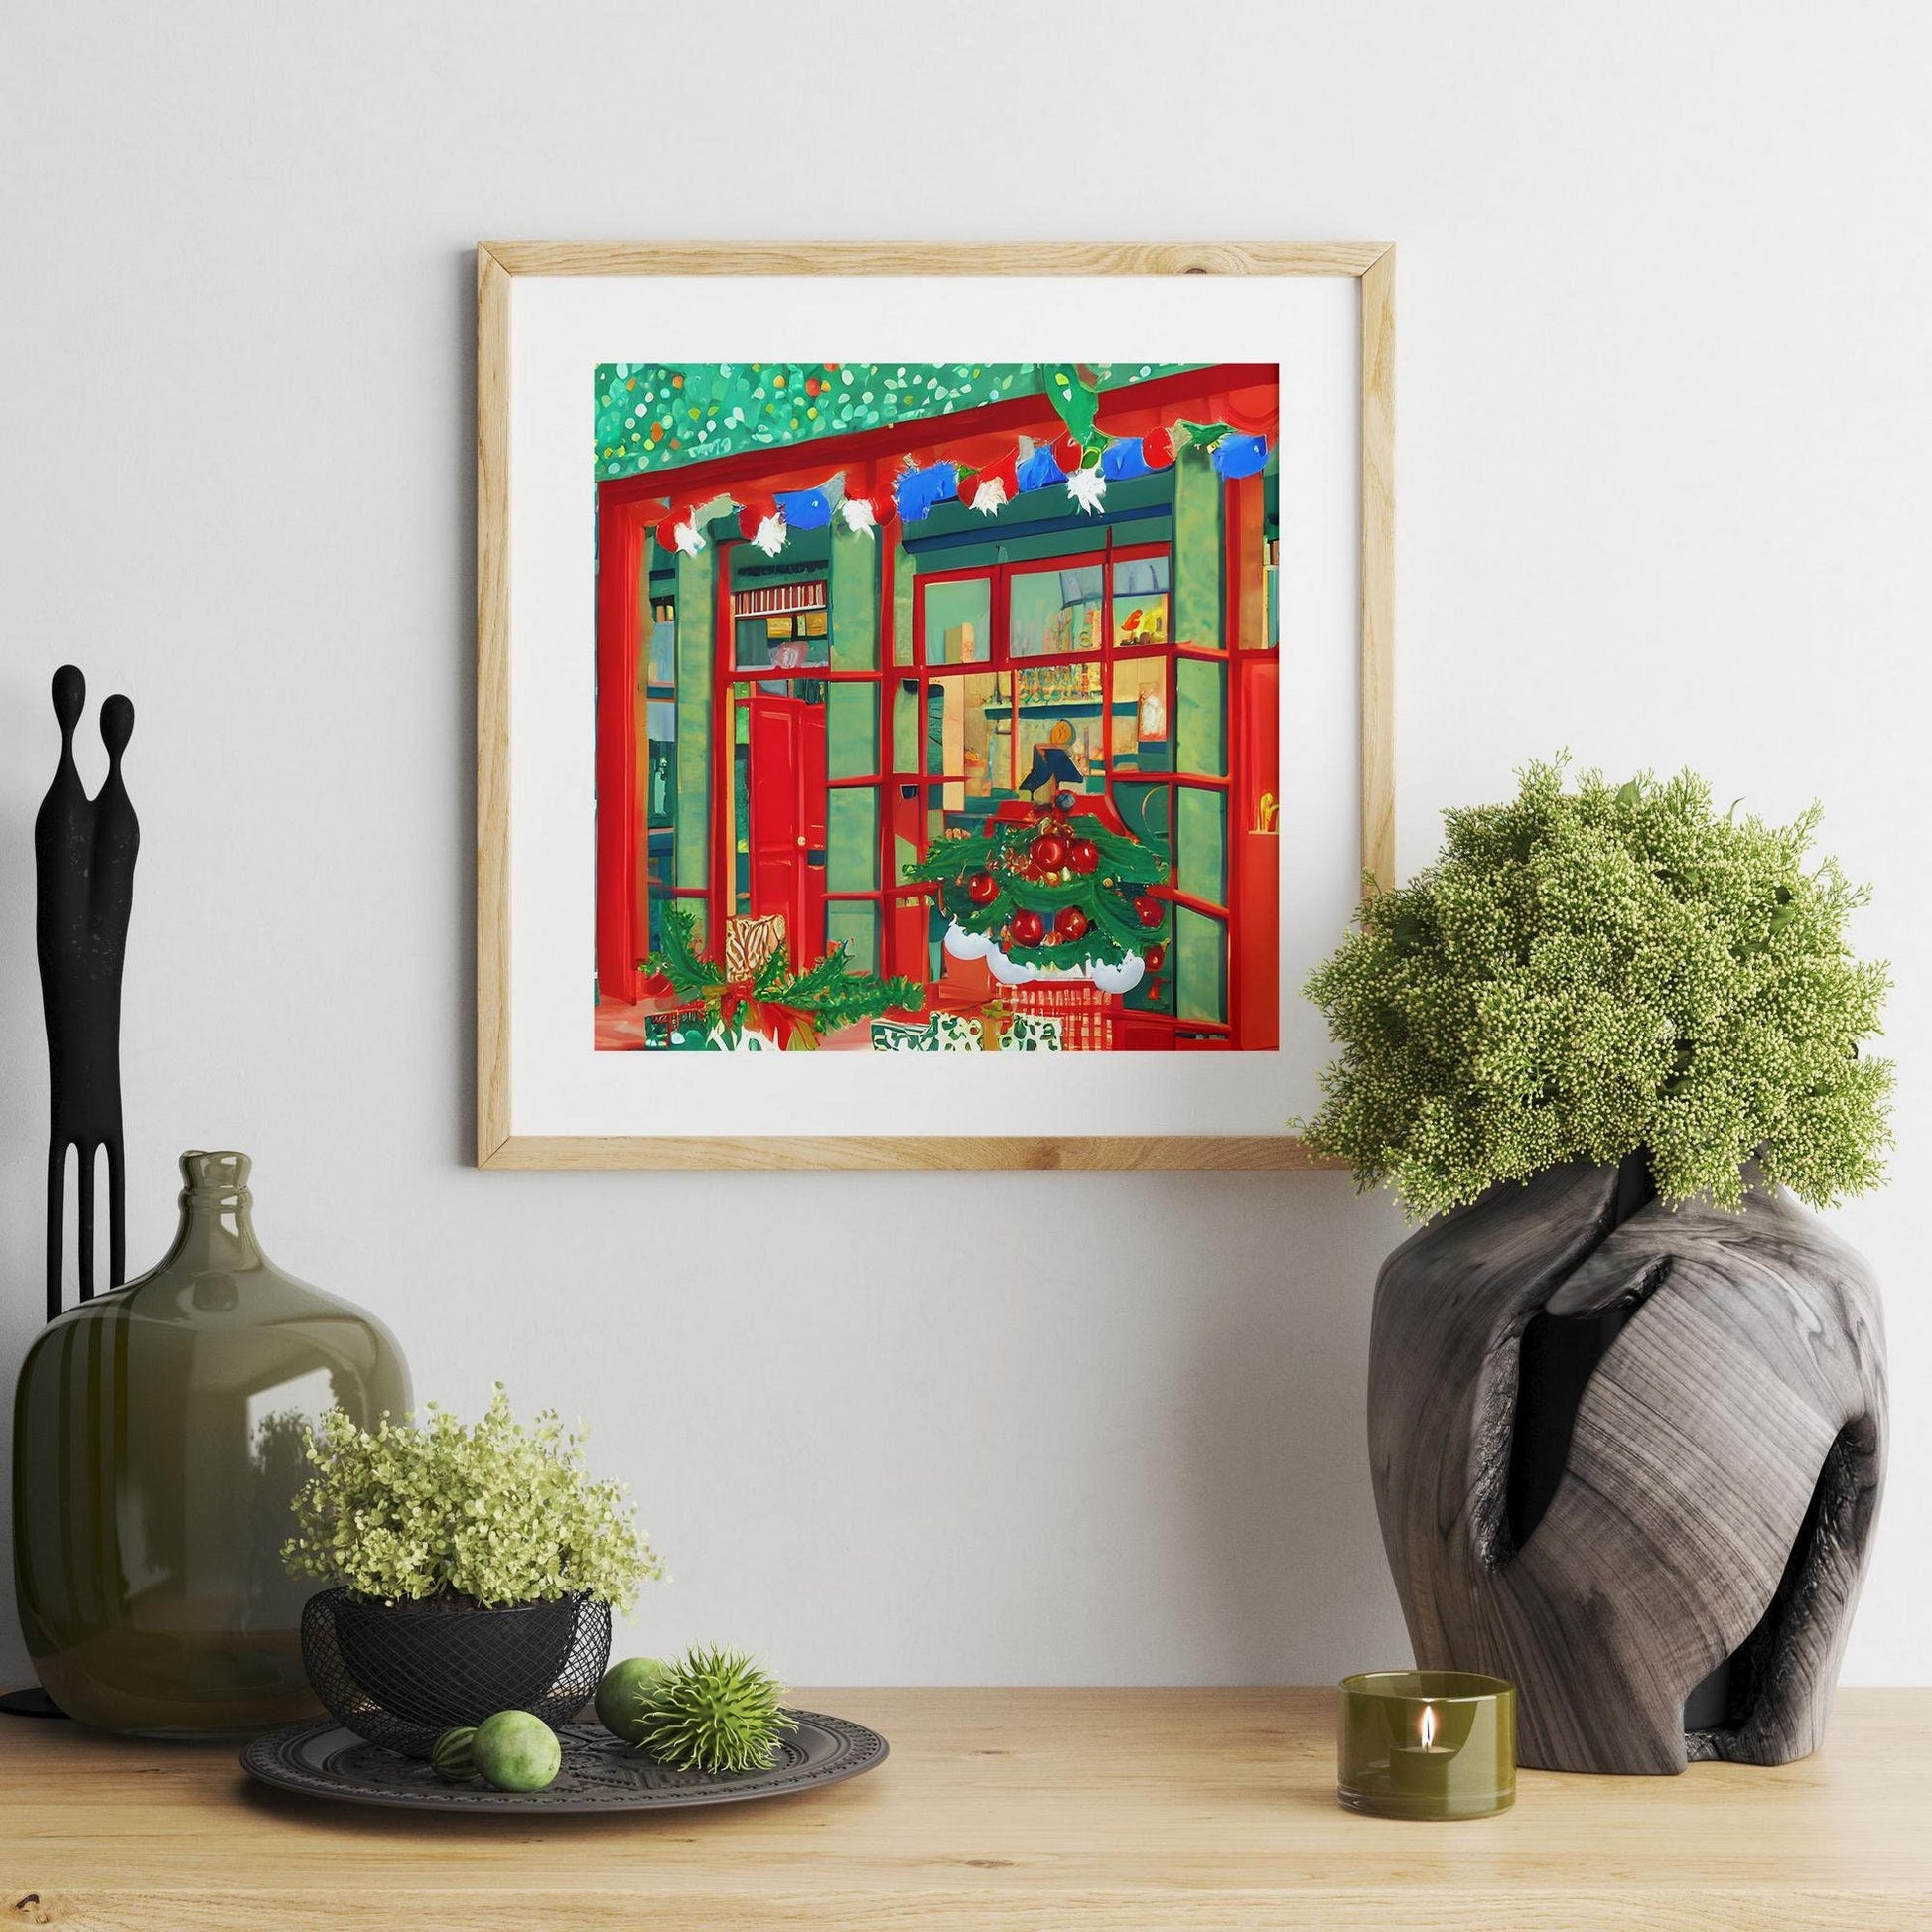 Window Of A Street Shop Decorated For Christmas Canvas Print, Canvas Art, Abstract Print, Contemporary Art, Bedroom Decor, Framed Canvas